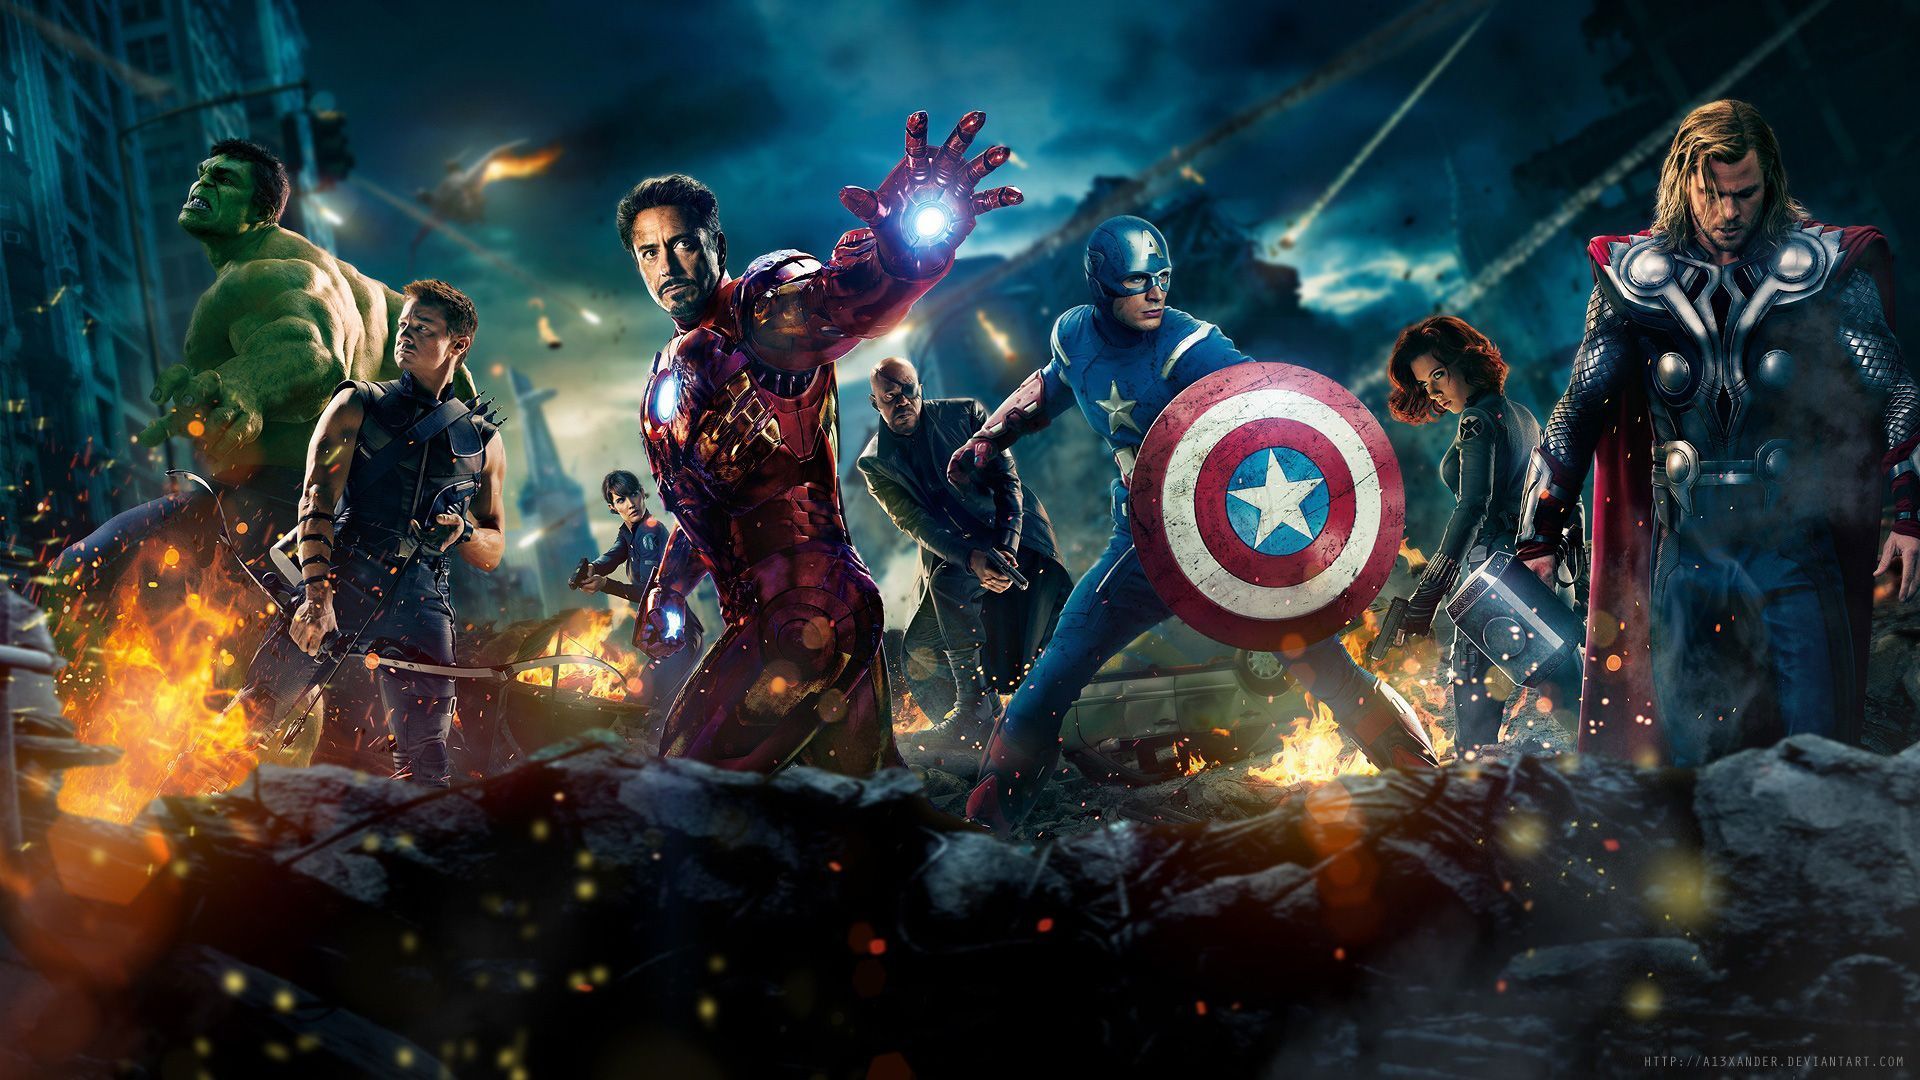 Download Iron Man Avengers The Movie Full Wallpaper 1920x1080 ...